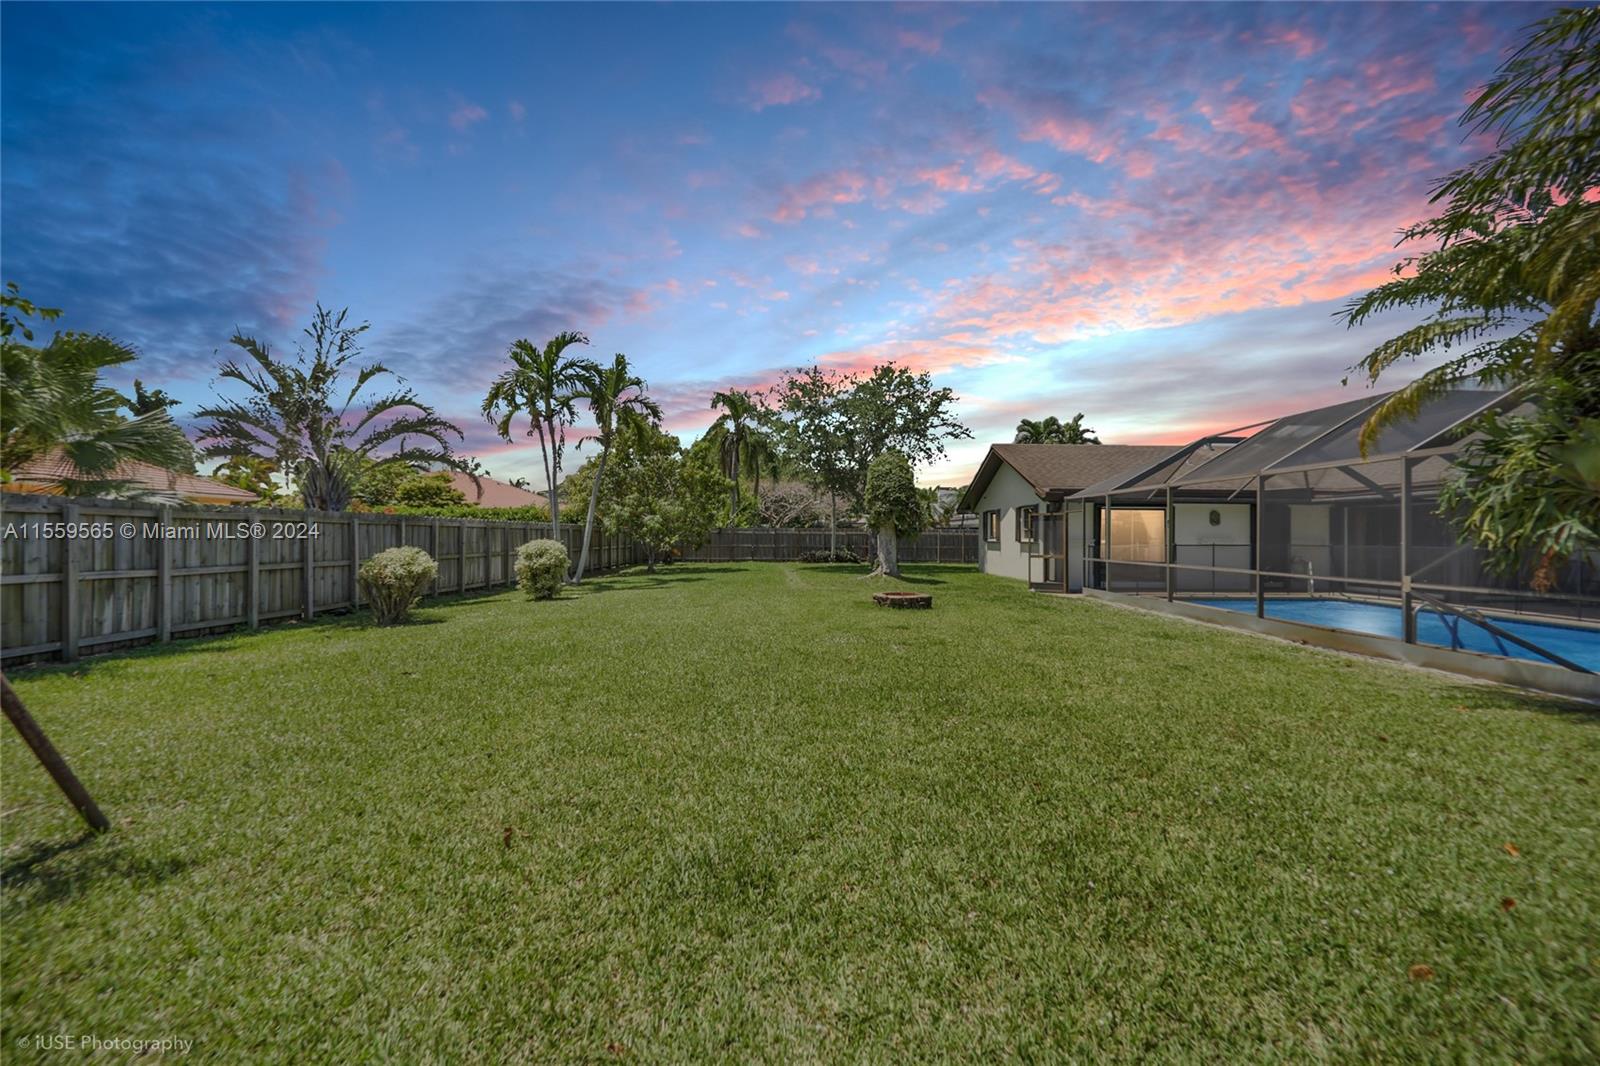 Welcome to a canvas of endless possibilities in this Cutler Bay Haven! Nestled in a serene cul-de-sac, this spacious split floorplan features 4 bedrooms, 3 full baths, and vaulted ceilings exuding openness and light.  Modern comfort meets timeless charm in the updated kitchen that flows effortlessly into the cozy family room. With its spacious covered patio and expansive backyard, this home is an entertainer's dream. The versatile layout and contemporary design of this home invites you to unleash your creativity and personalize every corner to your unique style.